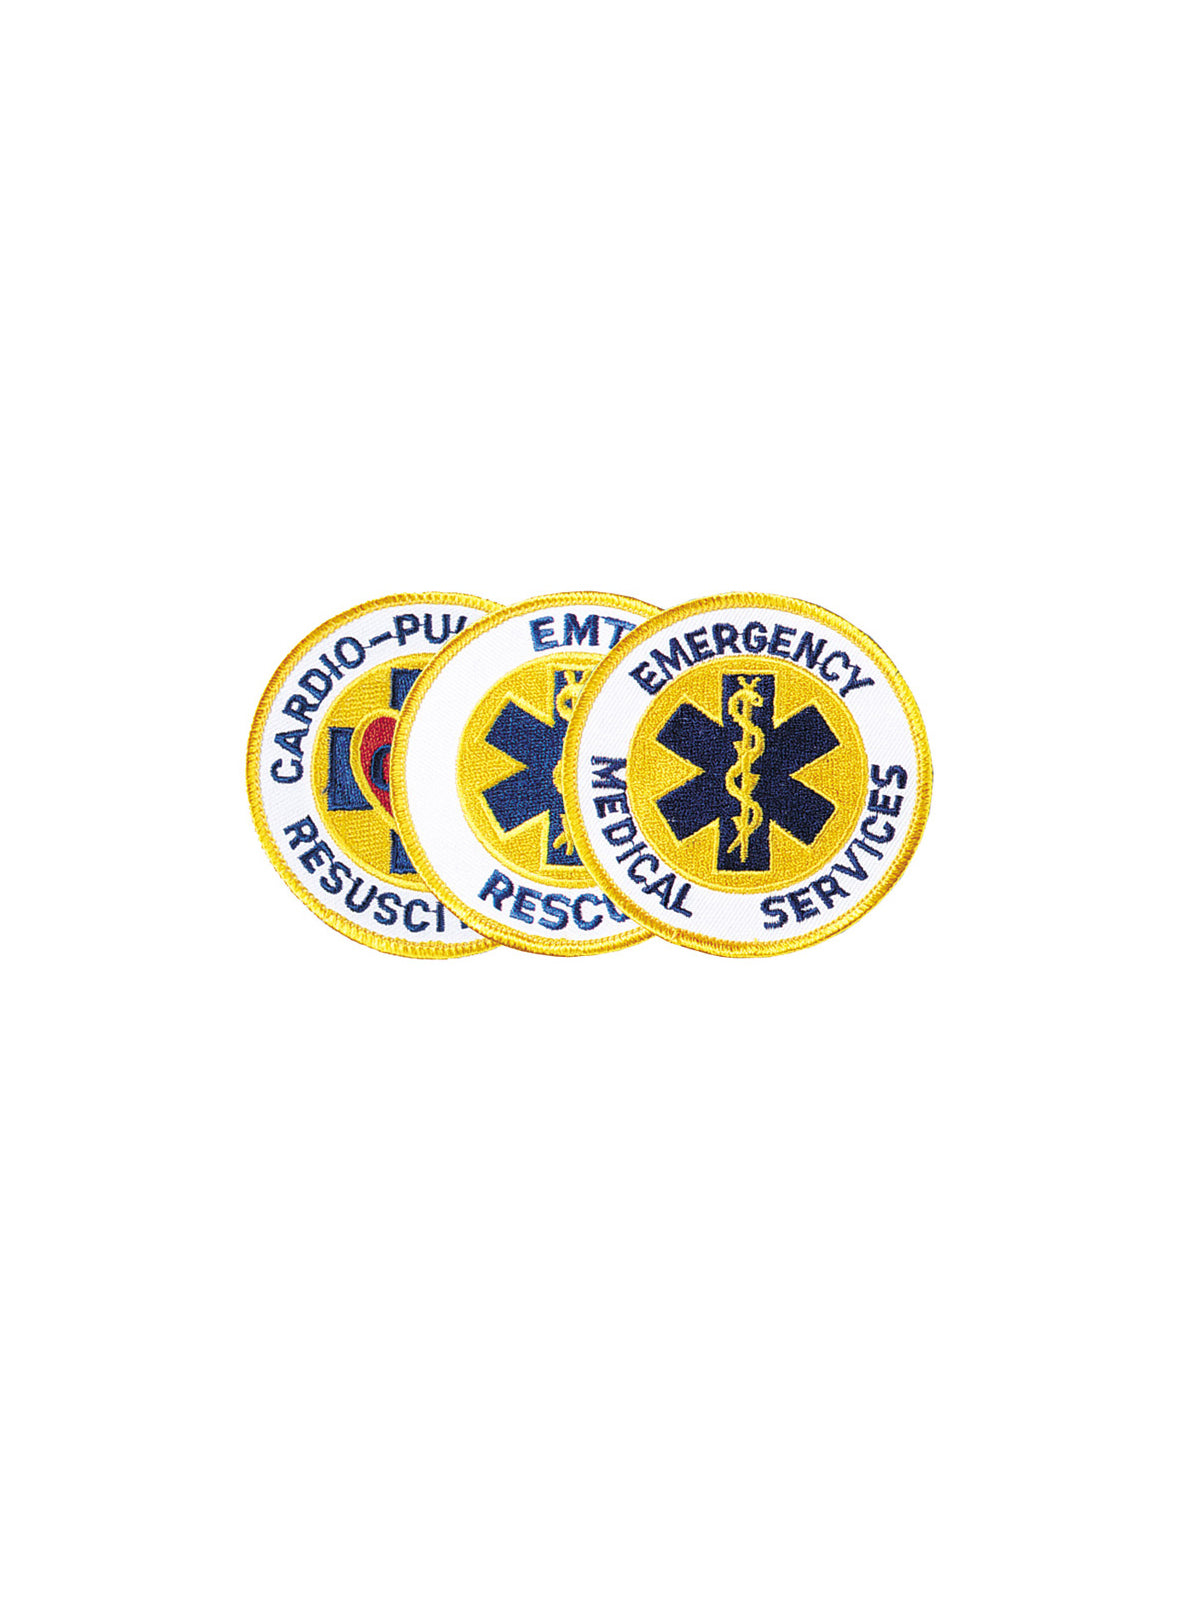 Custom Medical Patches - 1000E - Standard